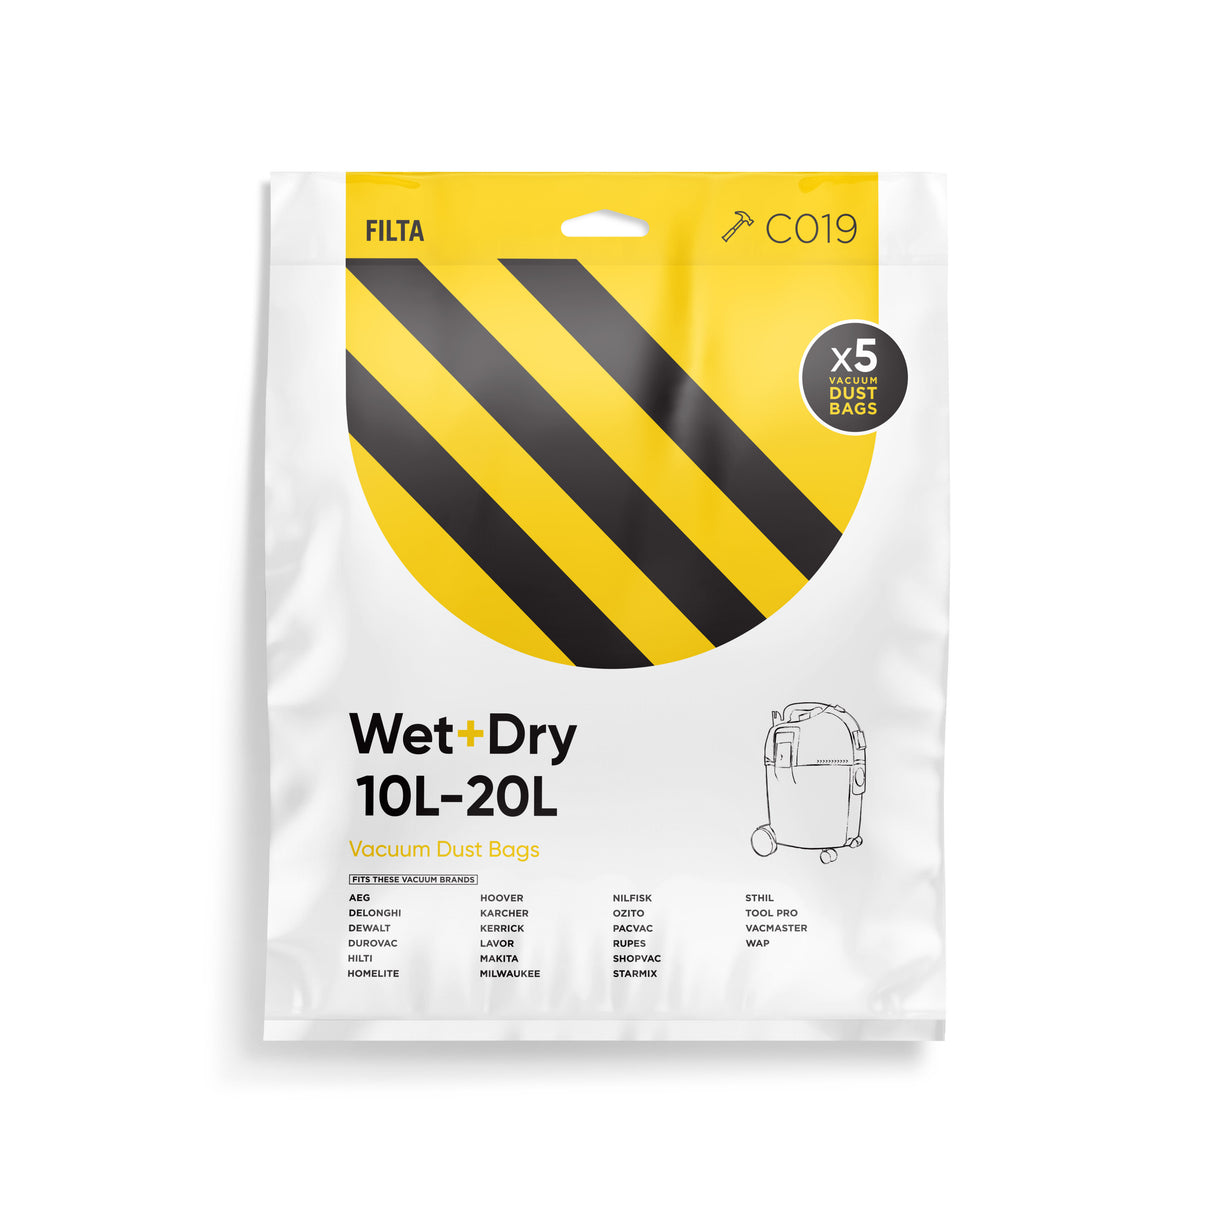 20L Wet And Dry Vacuum Bags - These Fit An Extensive Range Of Trade, Construction And Workshop Vacuums